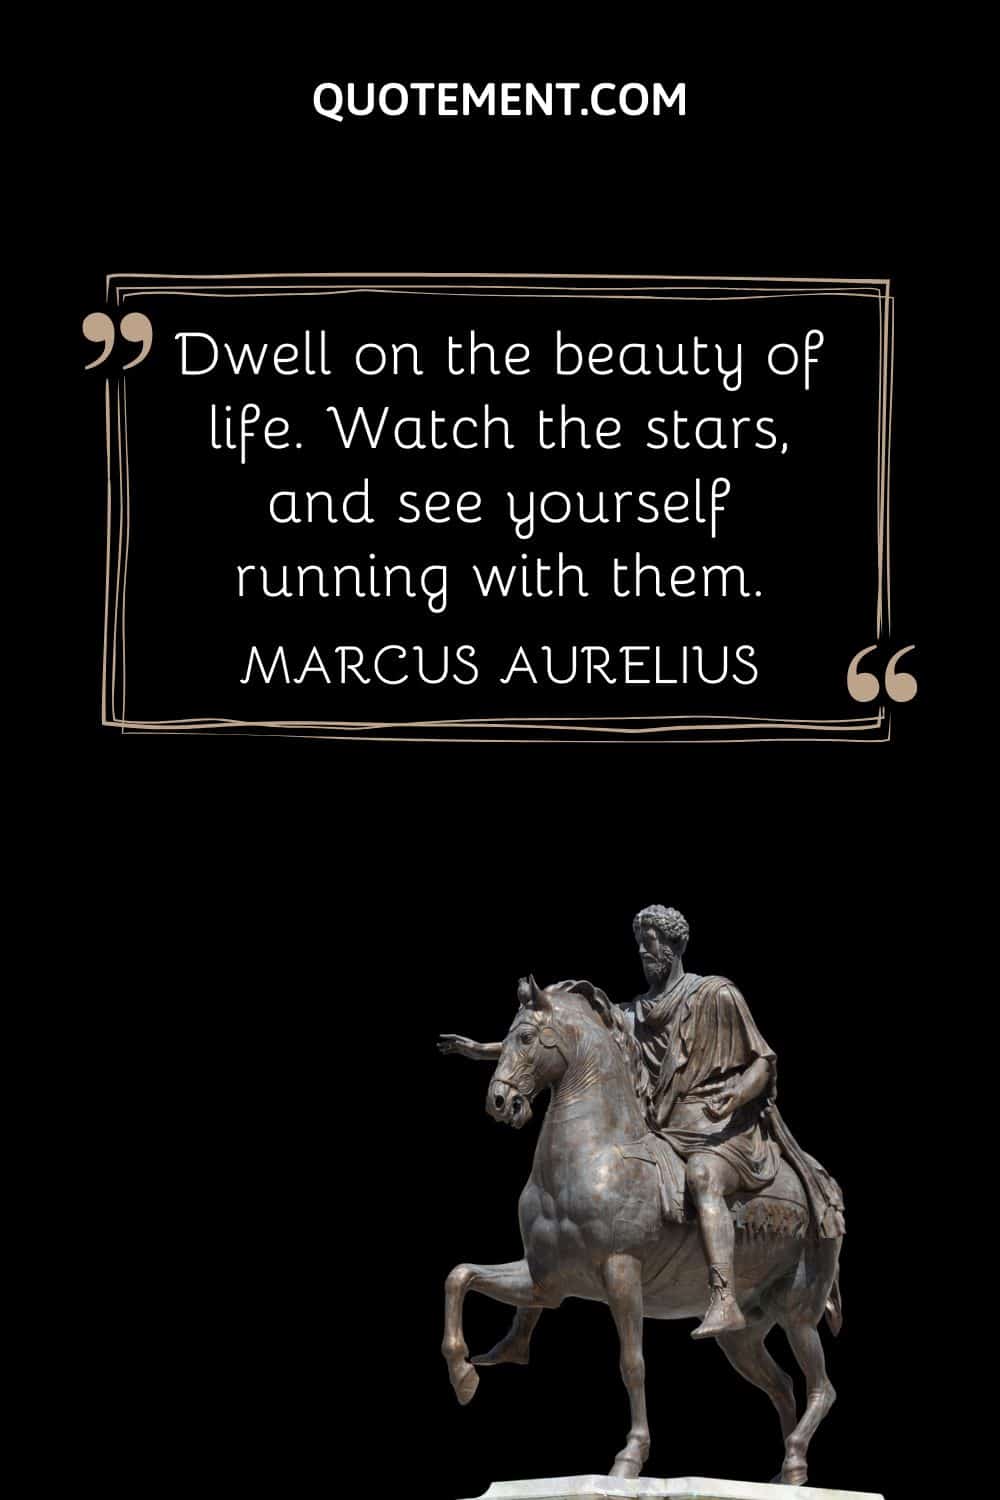 “Dwell on the beauty of life. Watch the stars, and see yourself running with them.” — Marcus Aurelius